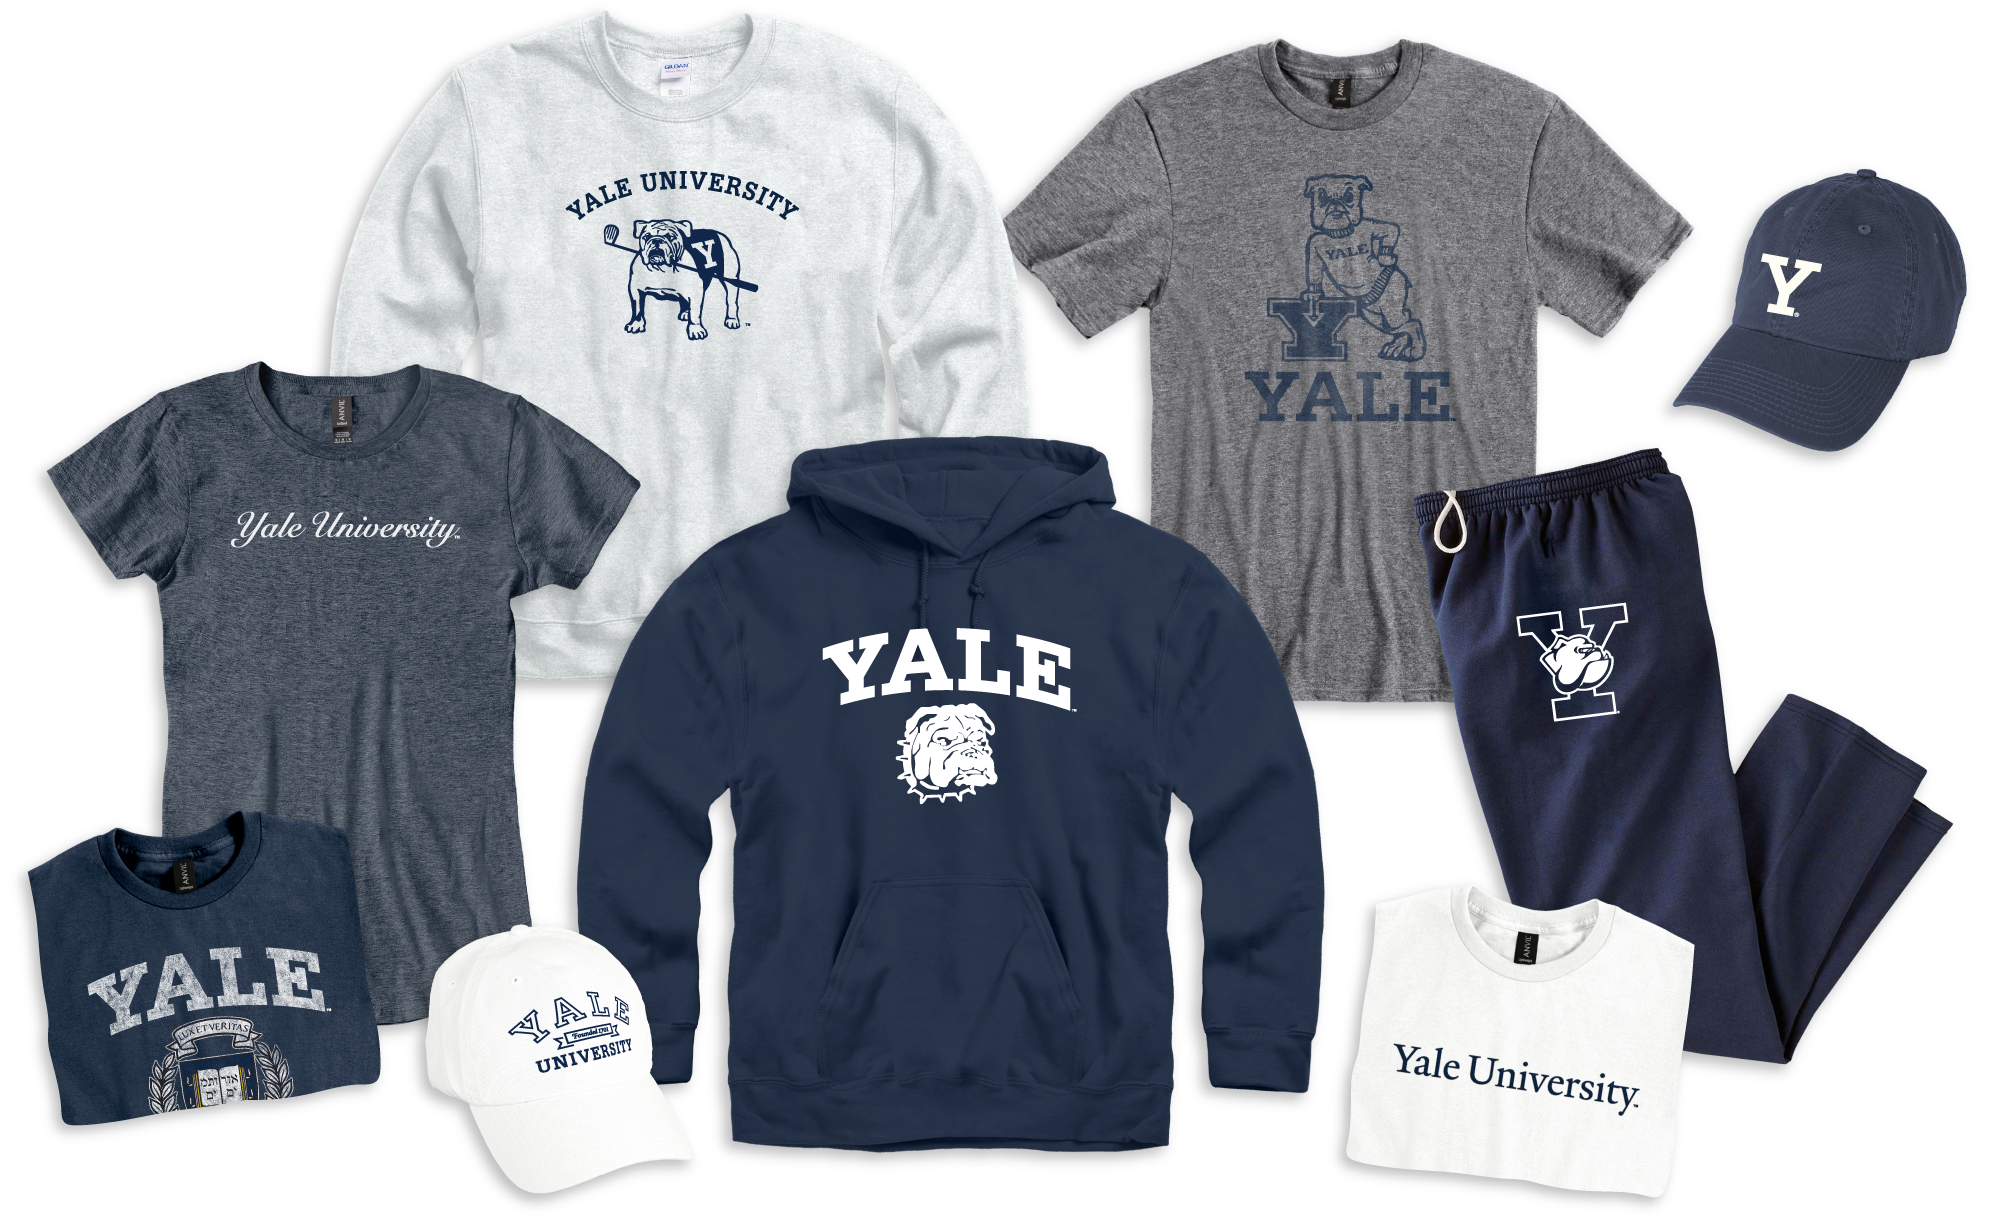 Yale-Collection: Assortment of 9 garments decorated with Yale University art